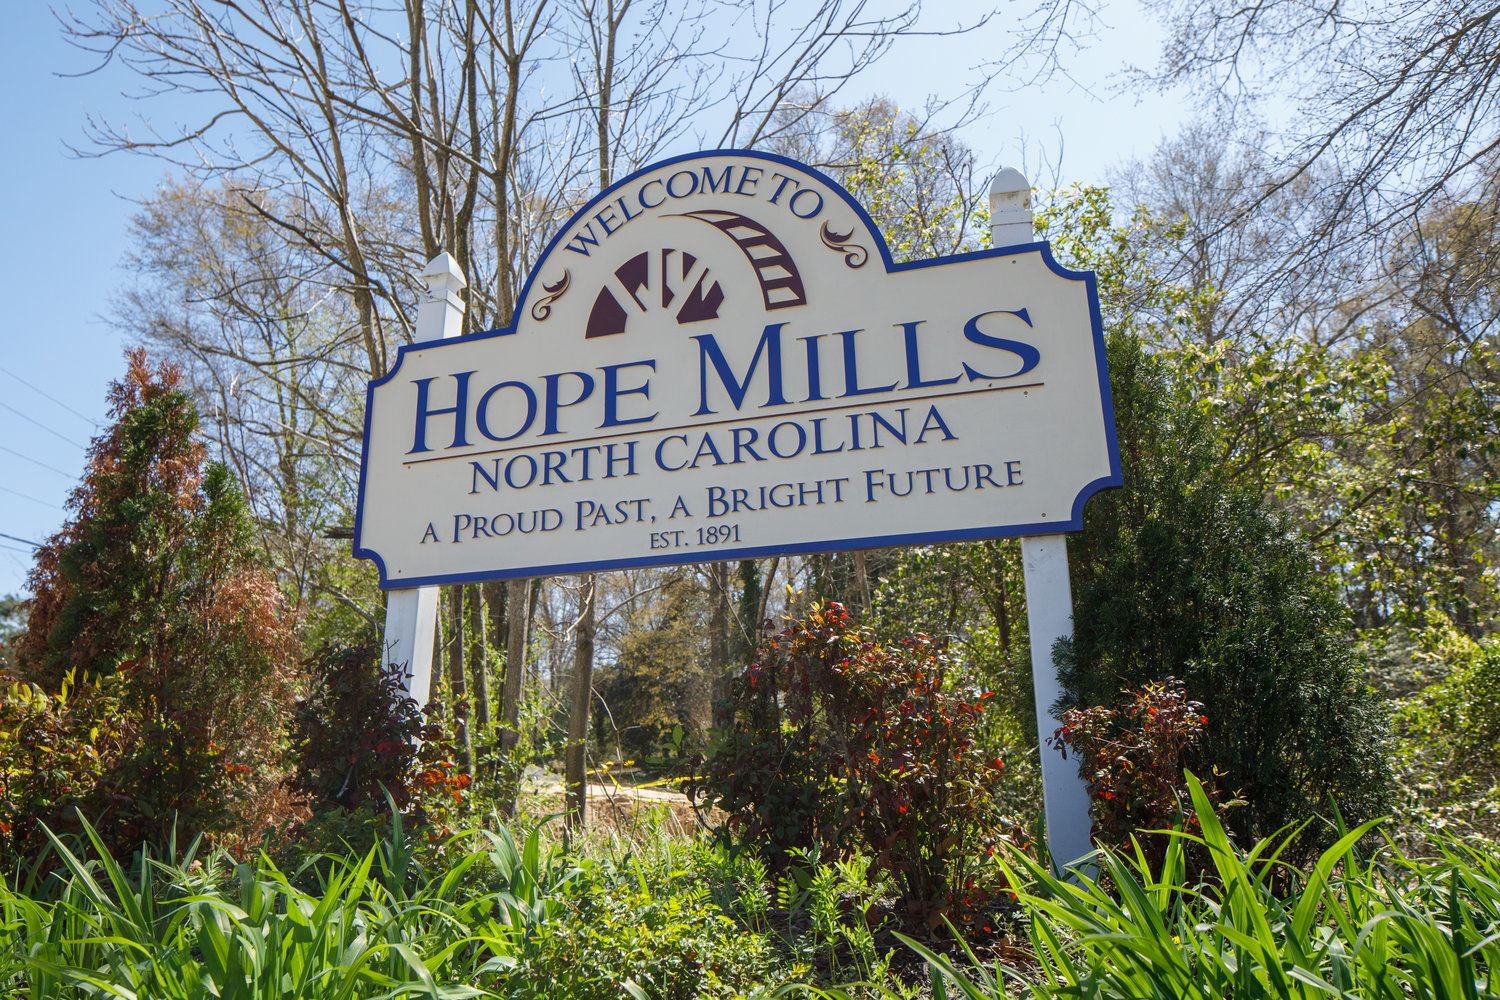 The Hope Mills Board of Commissioners will meet Monday night to hear an annexation request and a rezoning request.